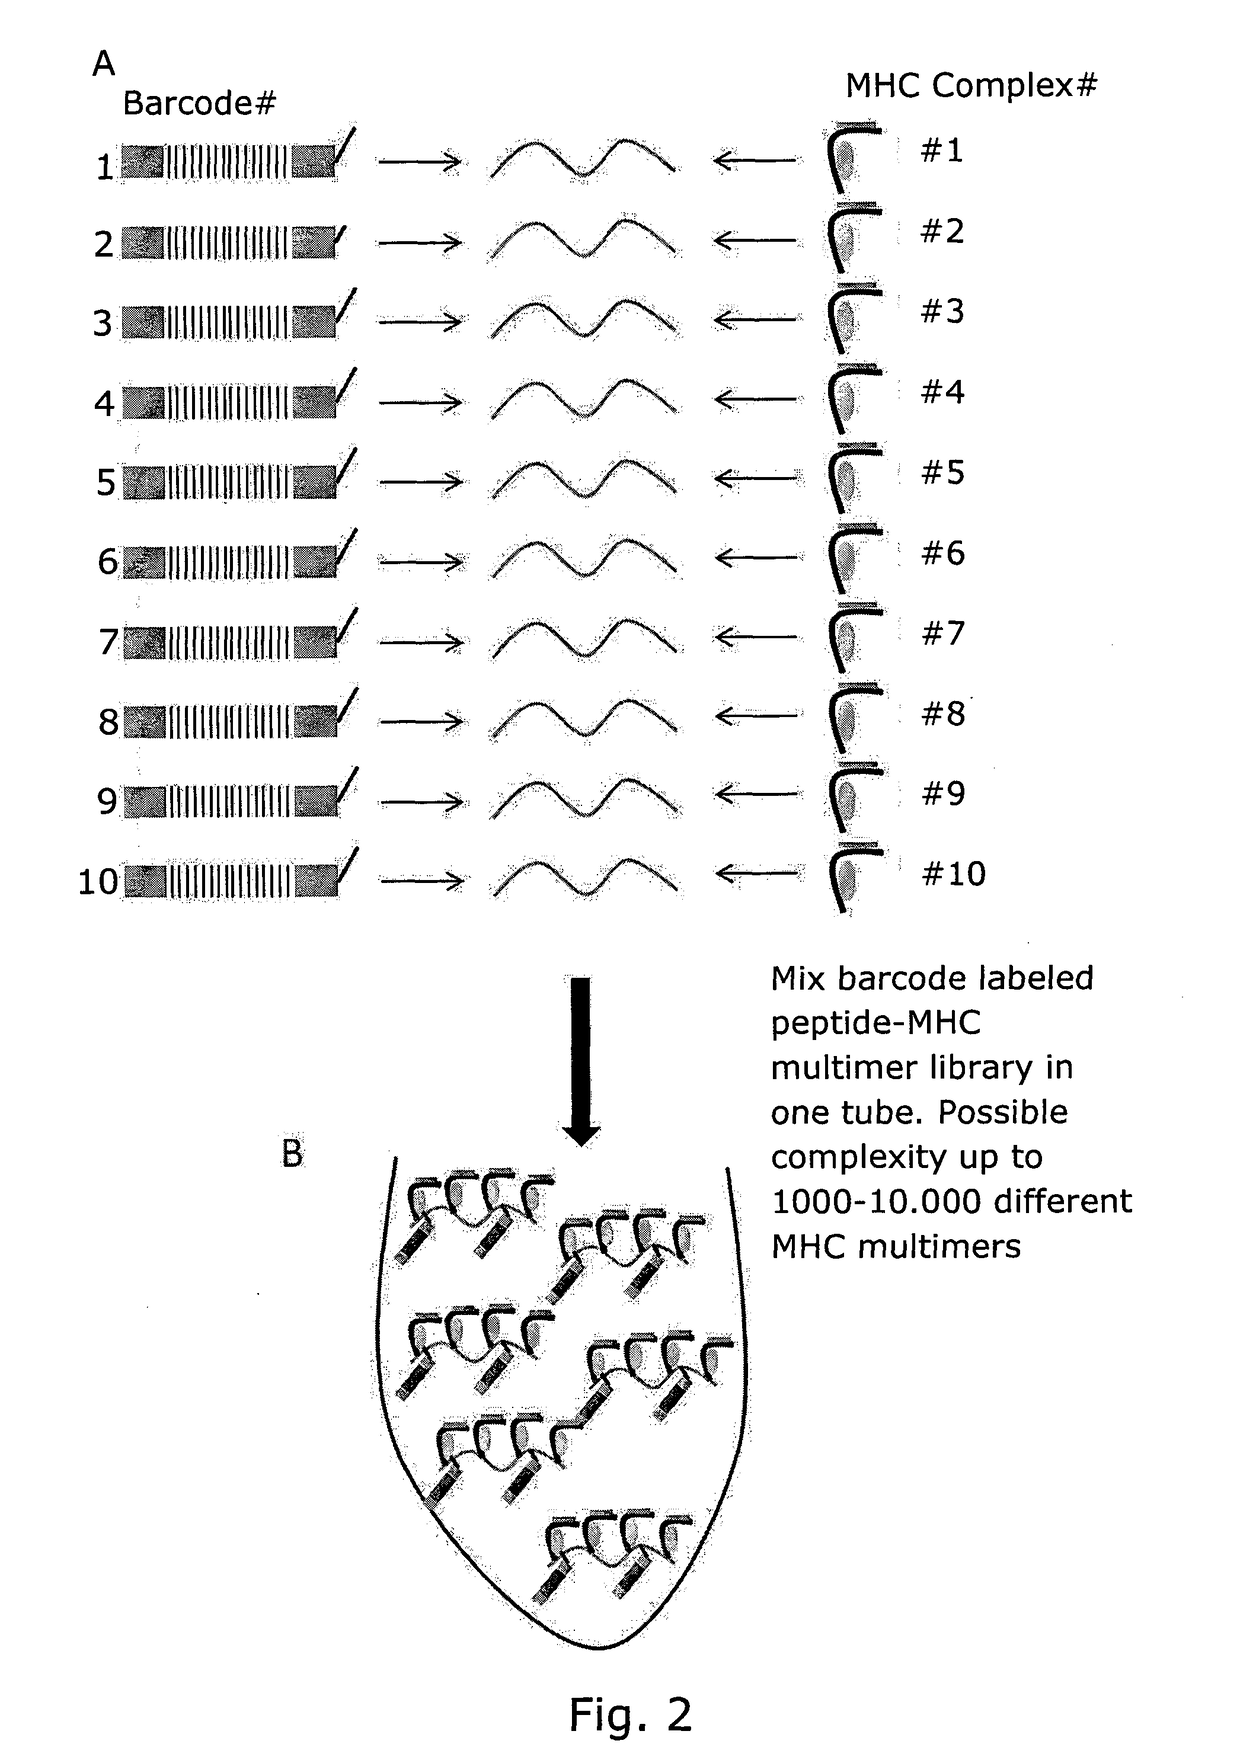 Determining Antigen Recognition through Barcoding of MHC Multimers